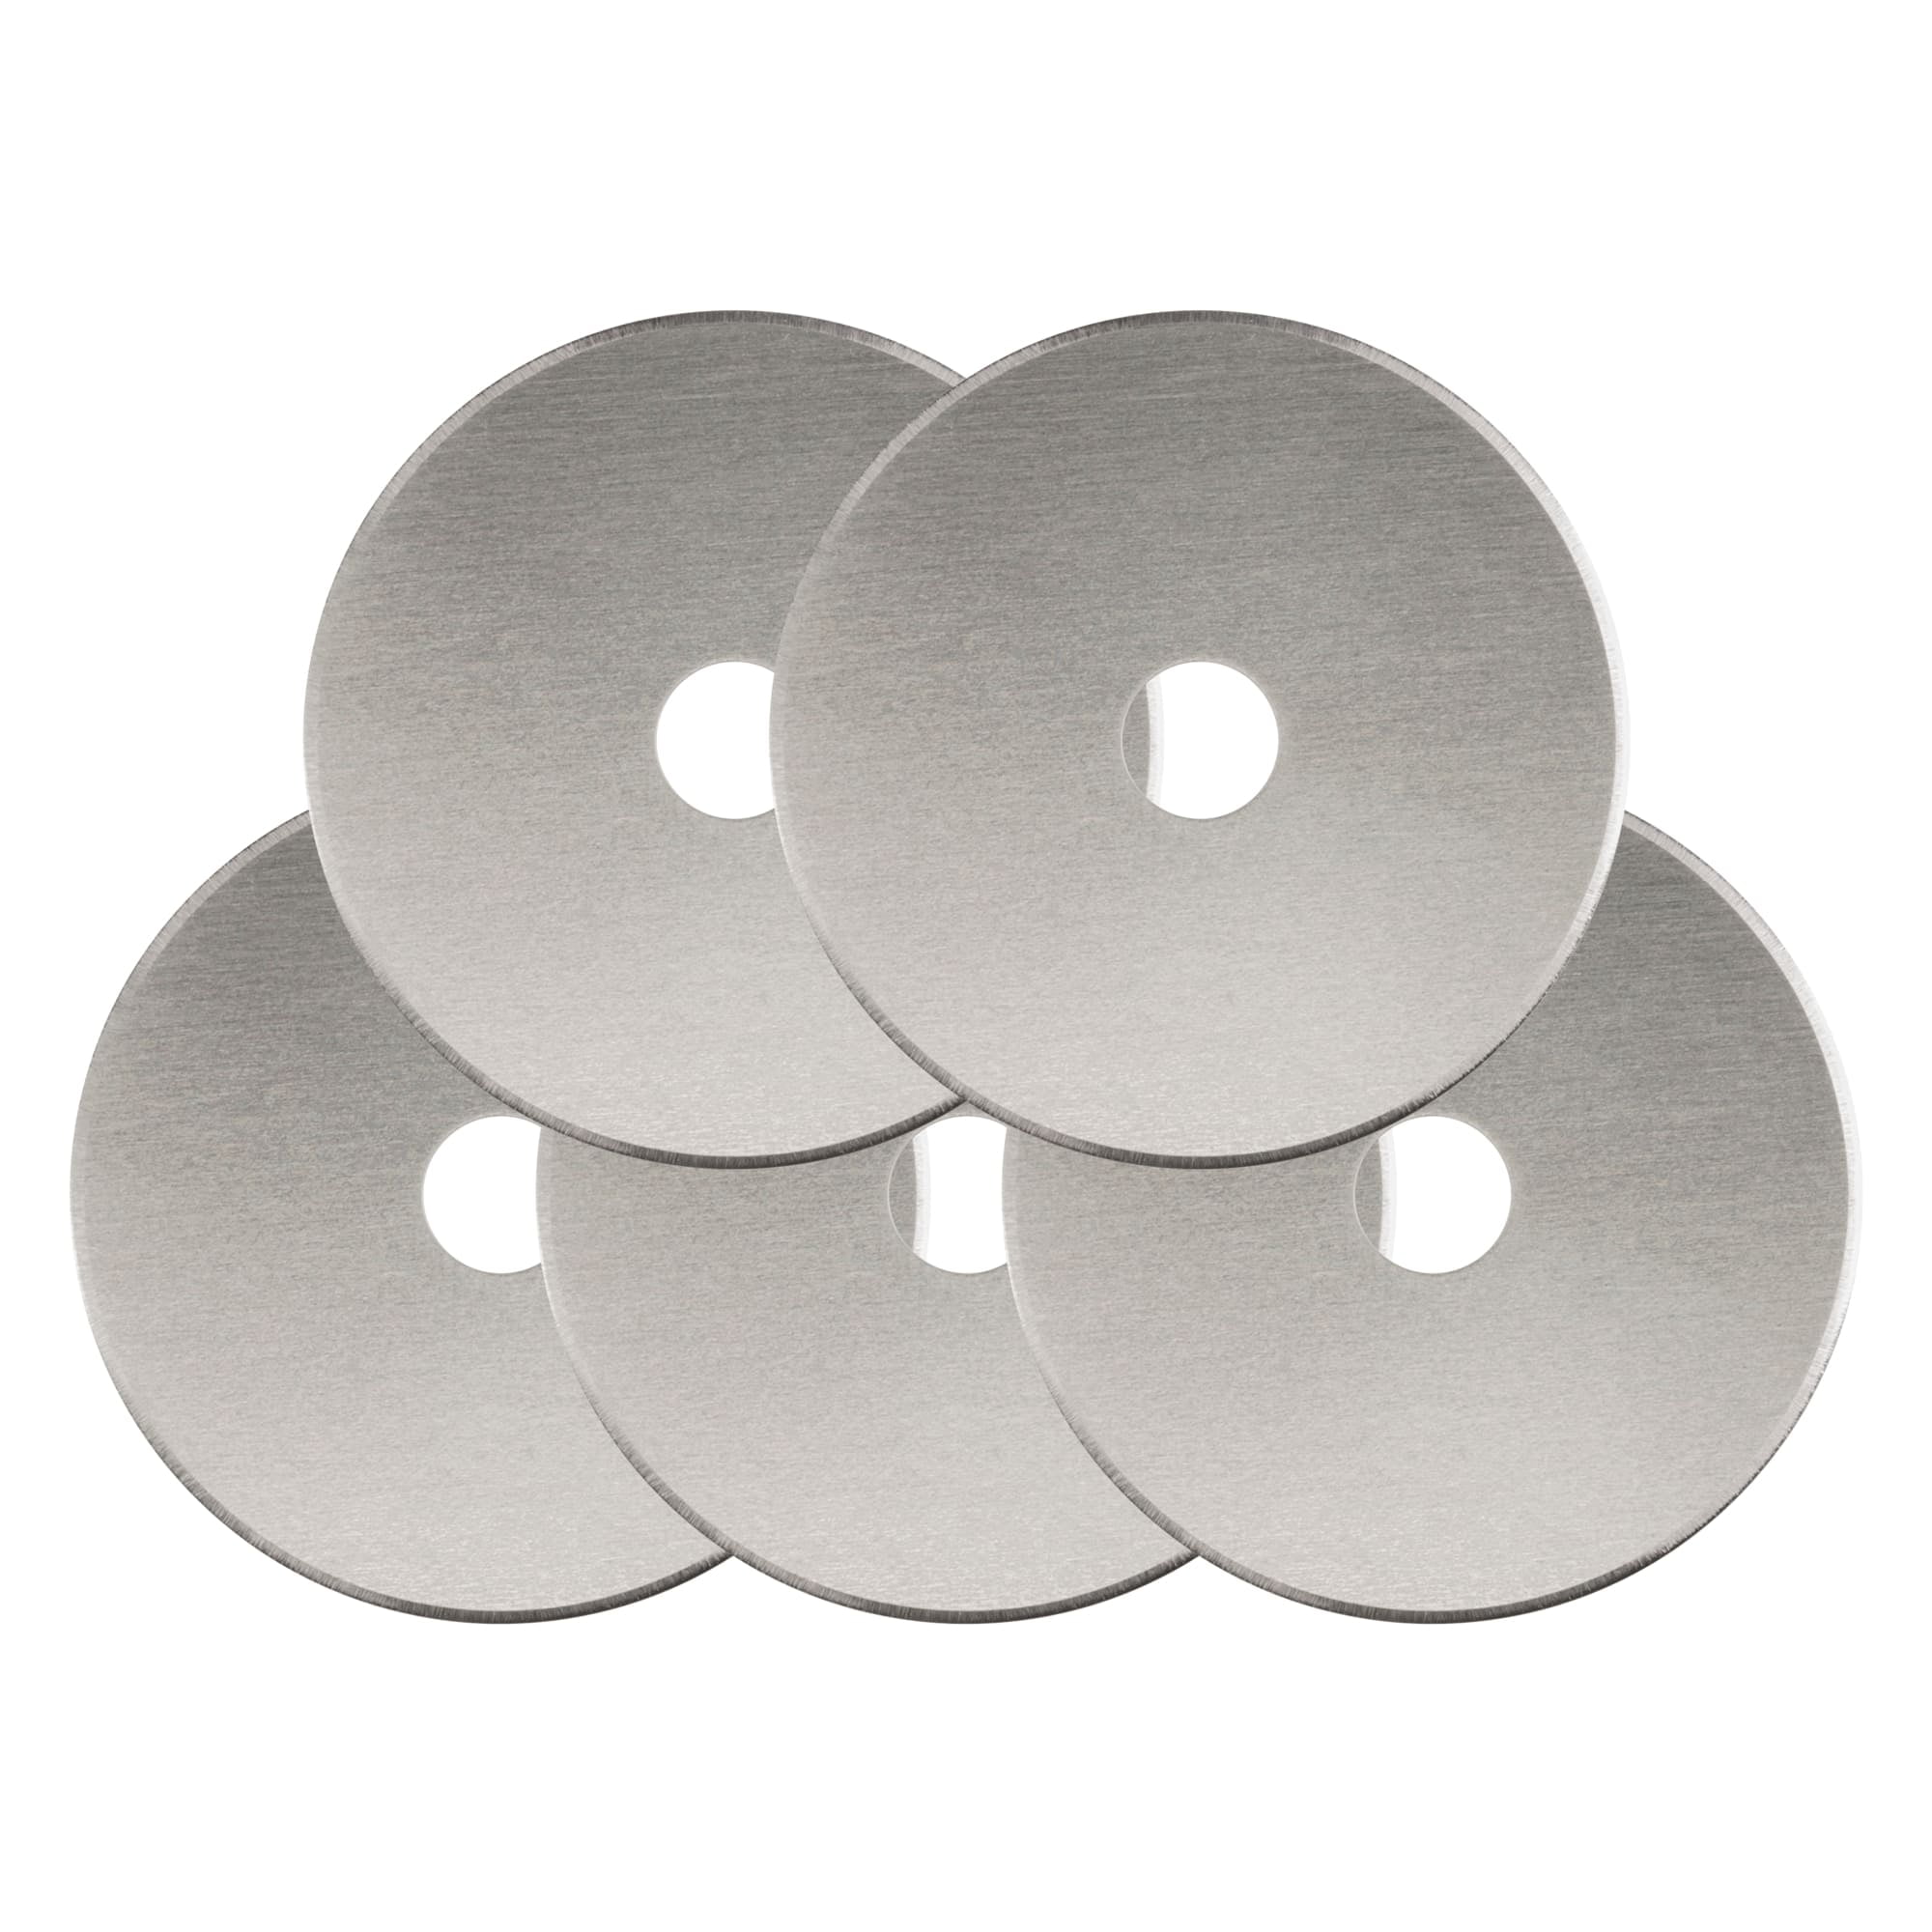 12 Pieces Rotary Cutter Blades Replacement Rotary Blades Round Trimmer  Refill Blades in 45 mm Compatible with Fiskars Olfa Rotary Cutter for  Quilting